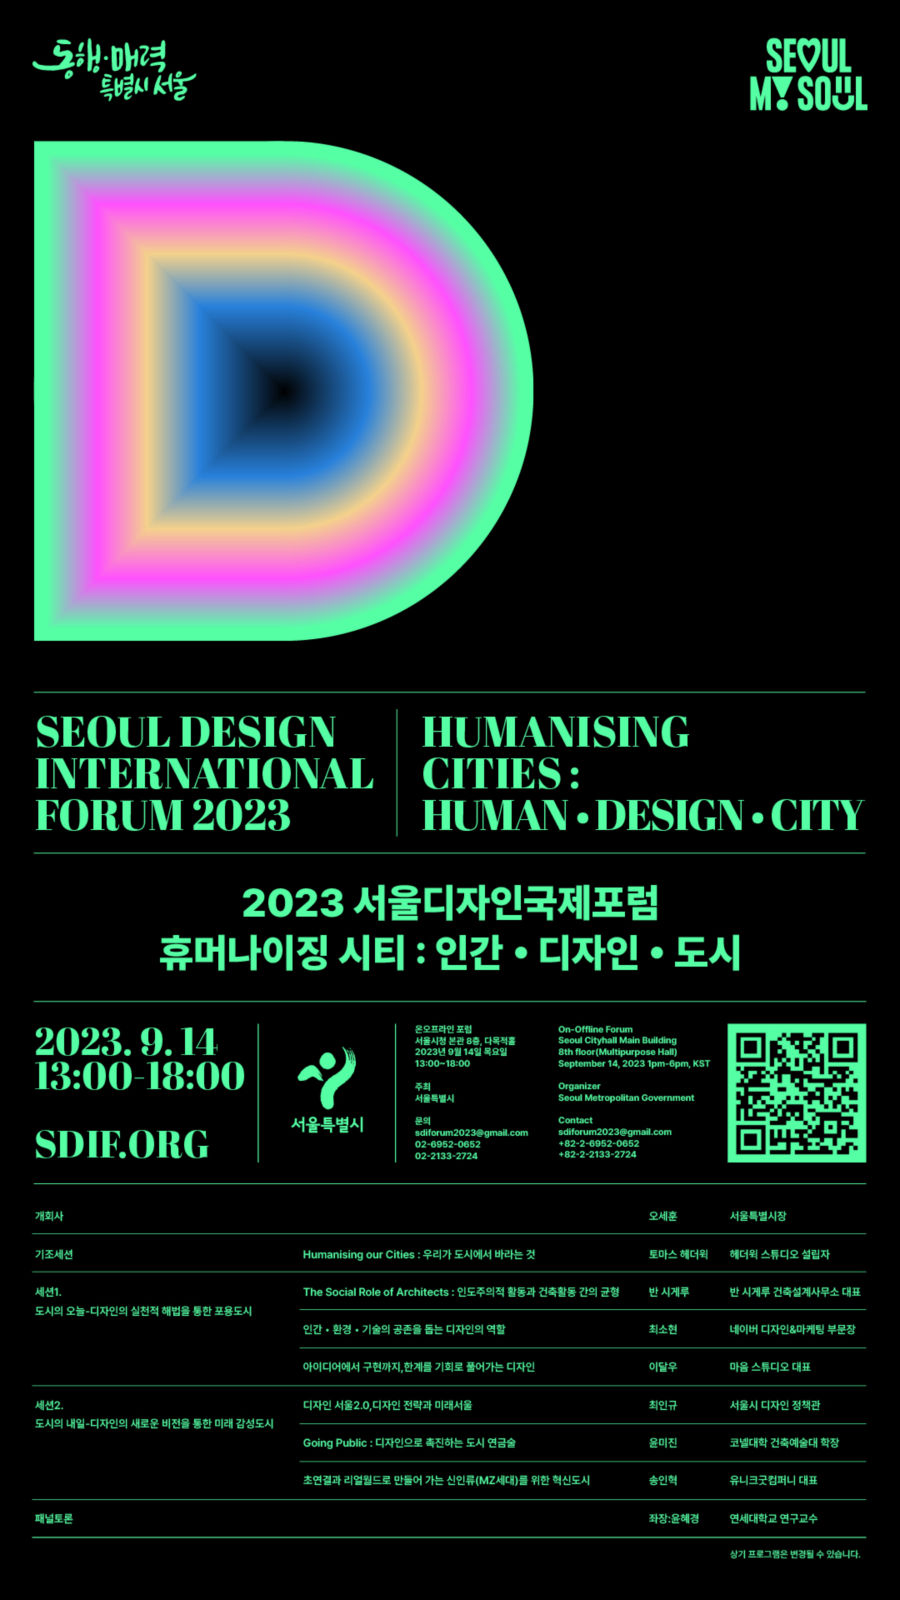 You are currently viewing Humanising Cities ! 서울시, 9월14일 서울디자인국제포럼 개최